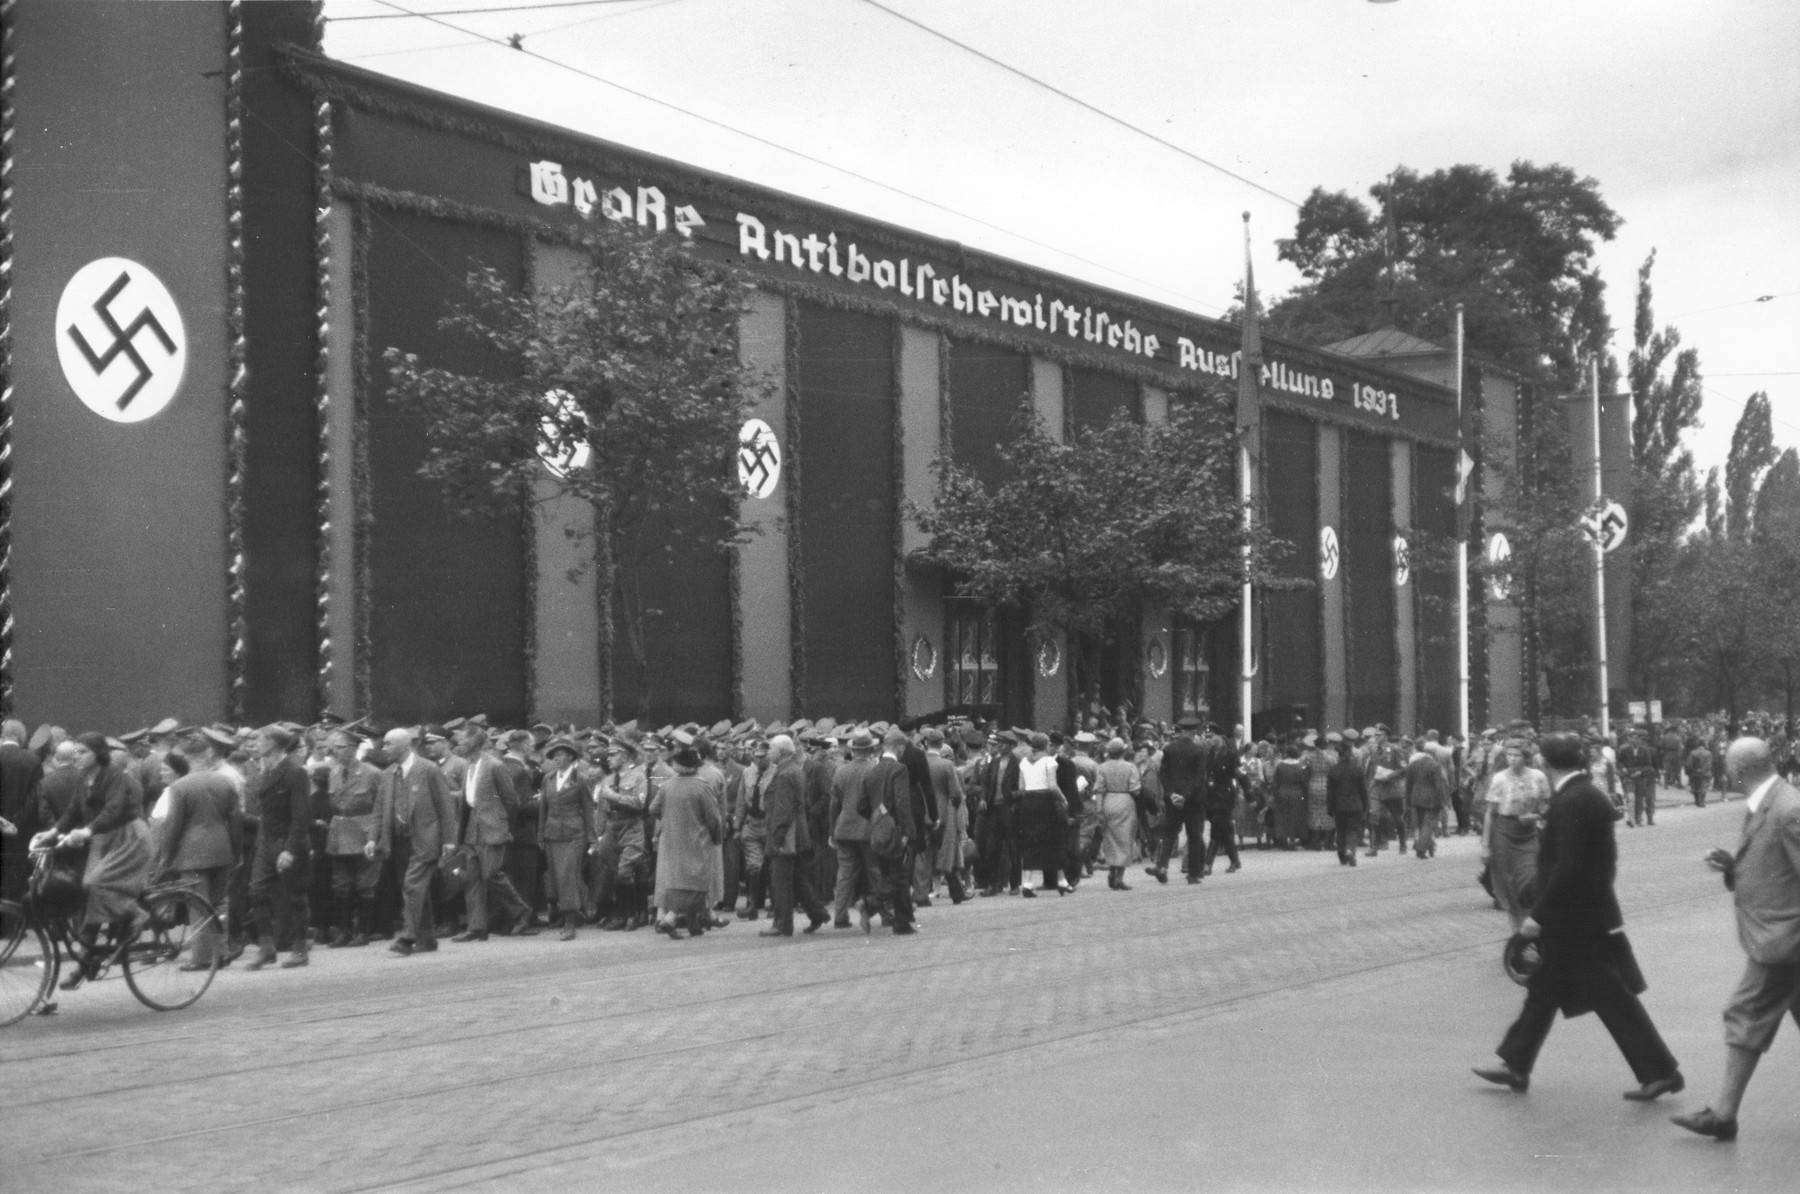 Visitors line up in front of a hall adorned with Nazi banners in order to attend the opening of the Great Anti-Bolshevism Exhibition 1937 (Grosse Antibolschewistische Ausstellung) in Nuremberg.